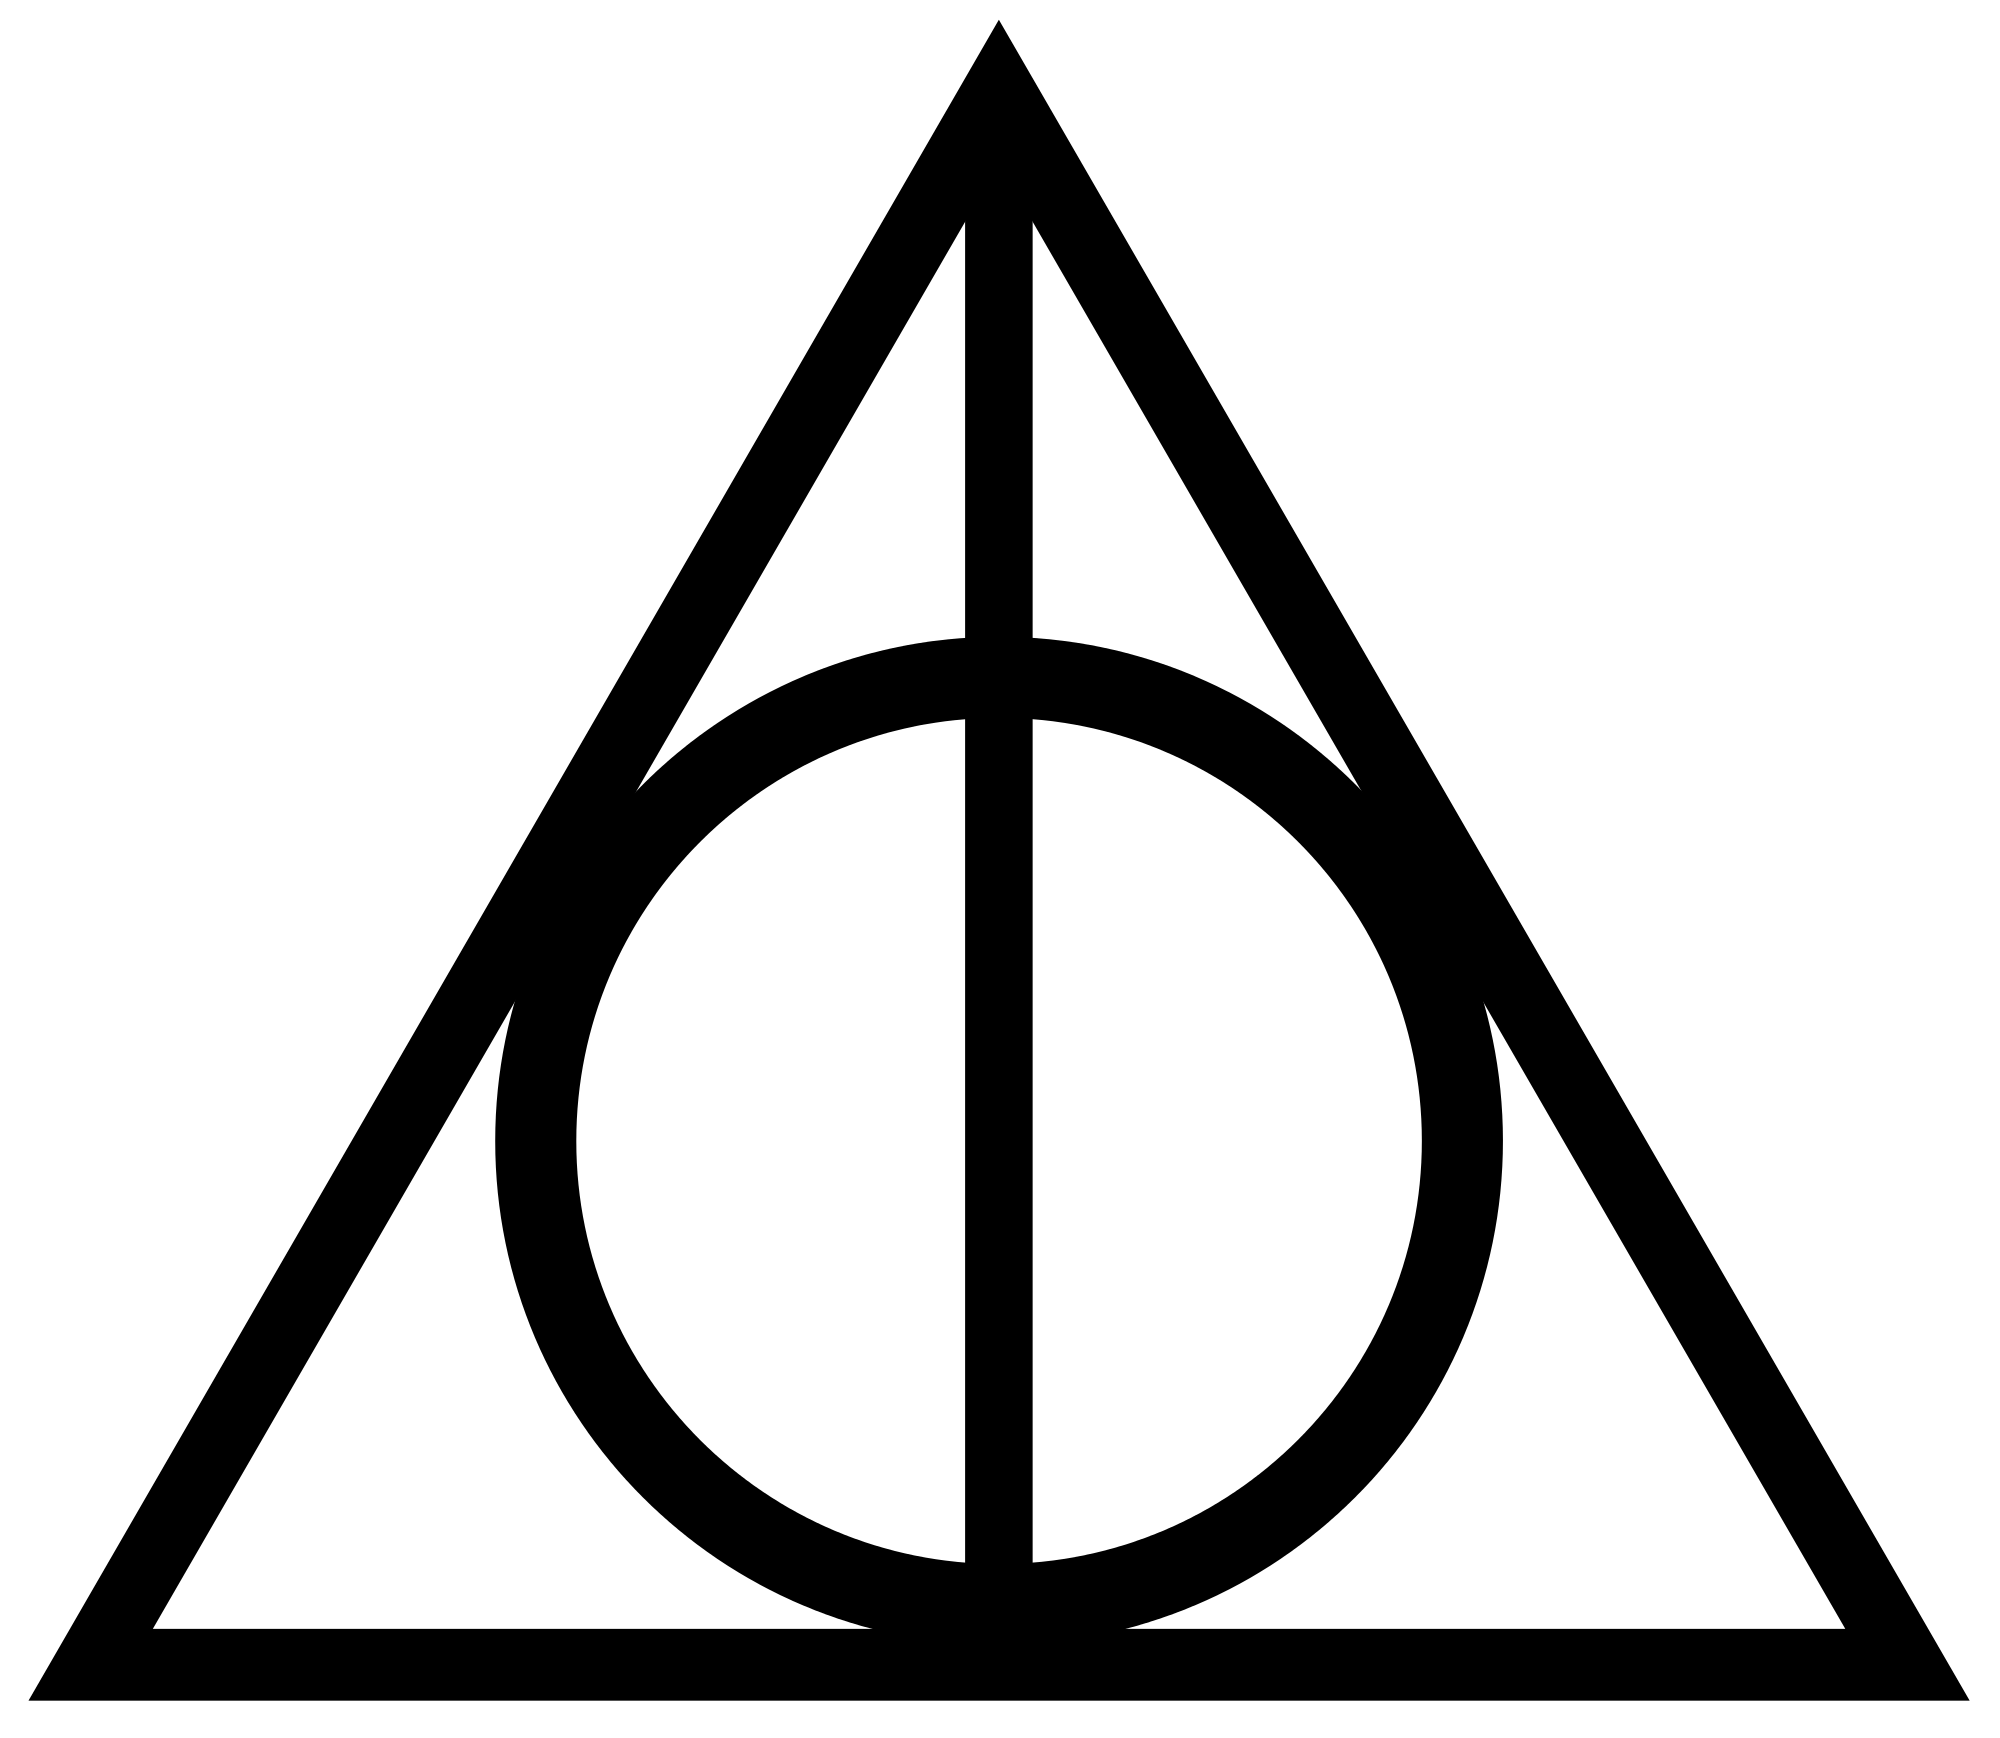 Triangle Harry Potter HP Logo - Deathly Hallows Sign.svg